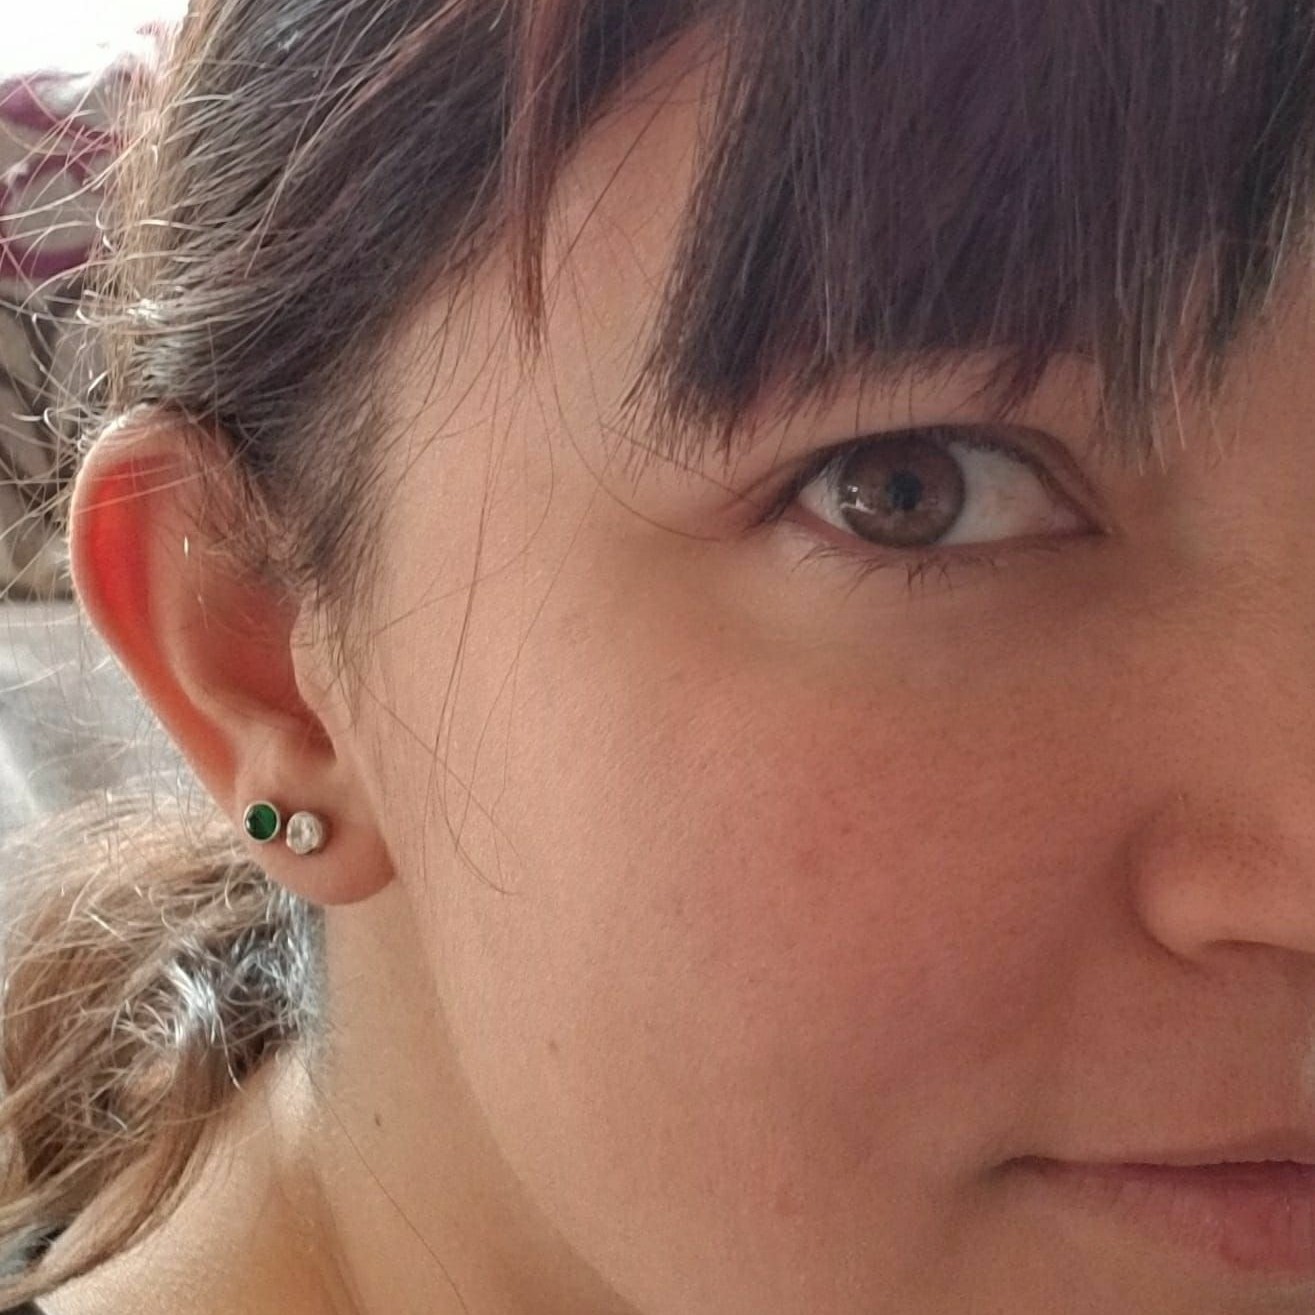 Comfortable Earrings (@comfyearrings) • Instagram photos and videos